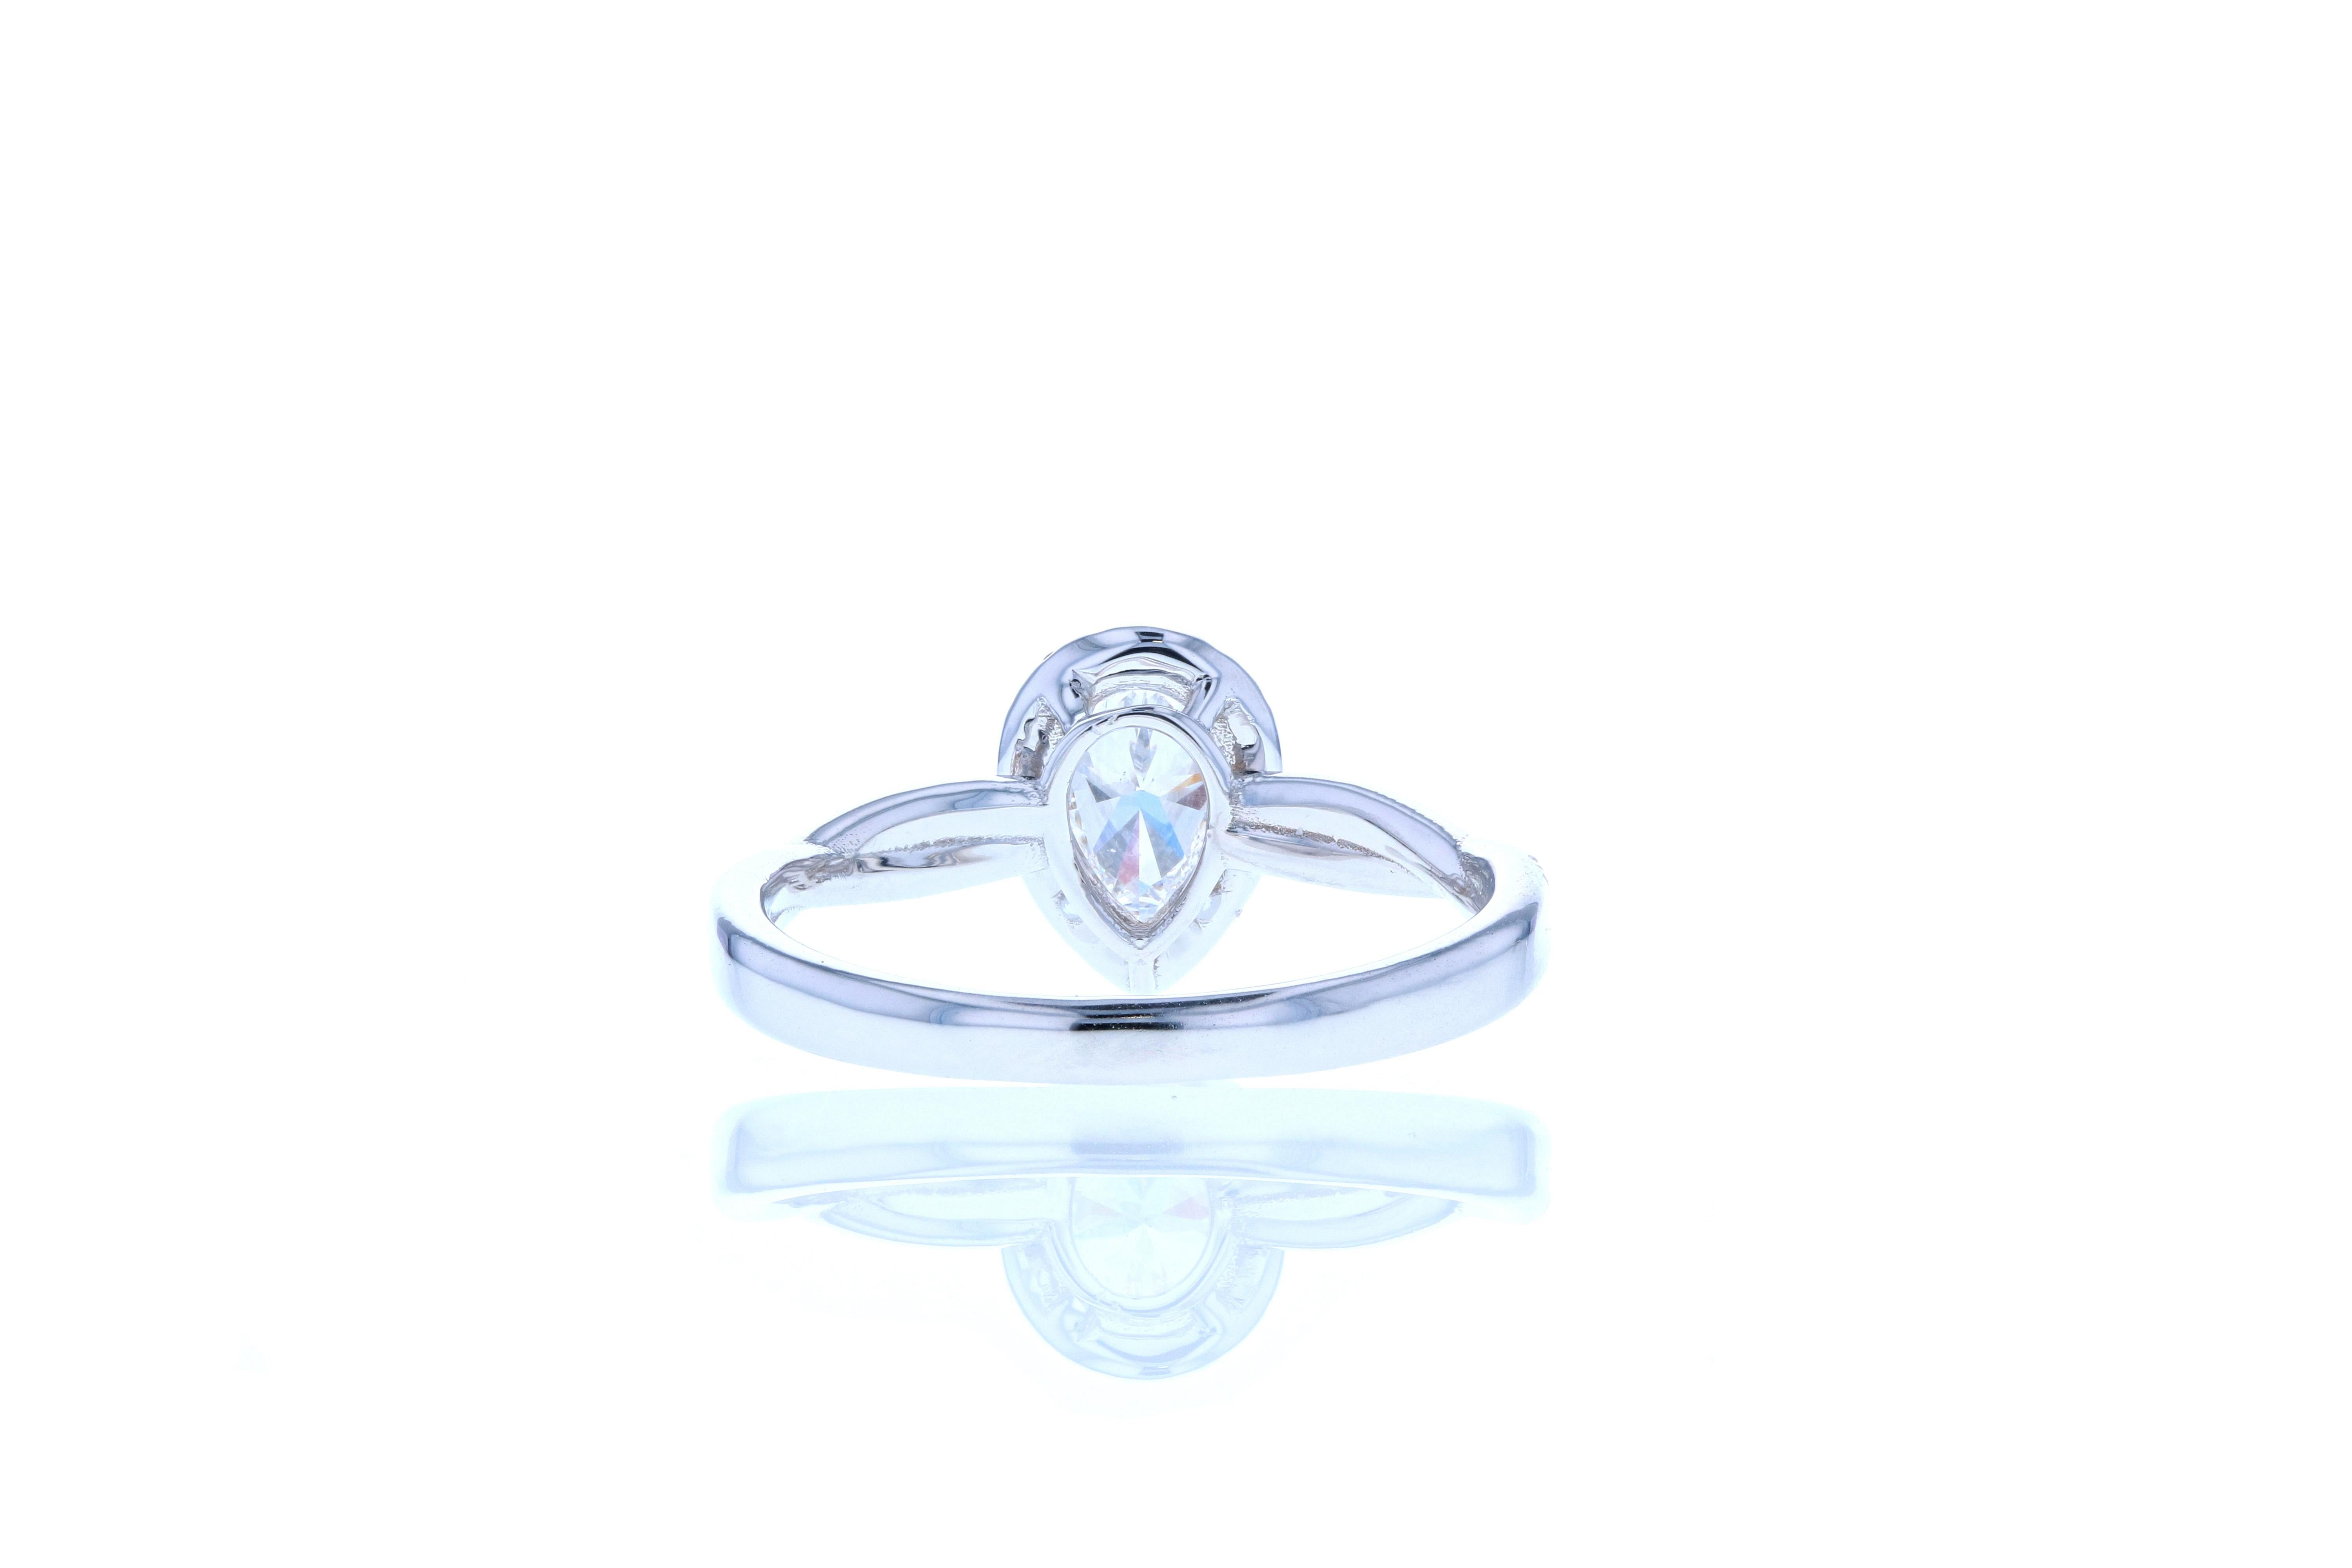 A dainty and elegant pear shaped diamond engagement ring featuring pear shaped center diamond surrounded by a delicate diamond halo to increase the perceived size of the center stone. The shank is an elegantly undulating band with one row of diamond